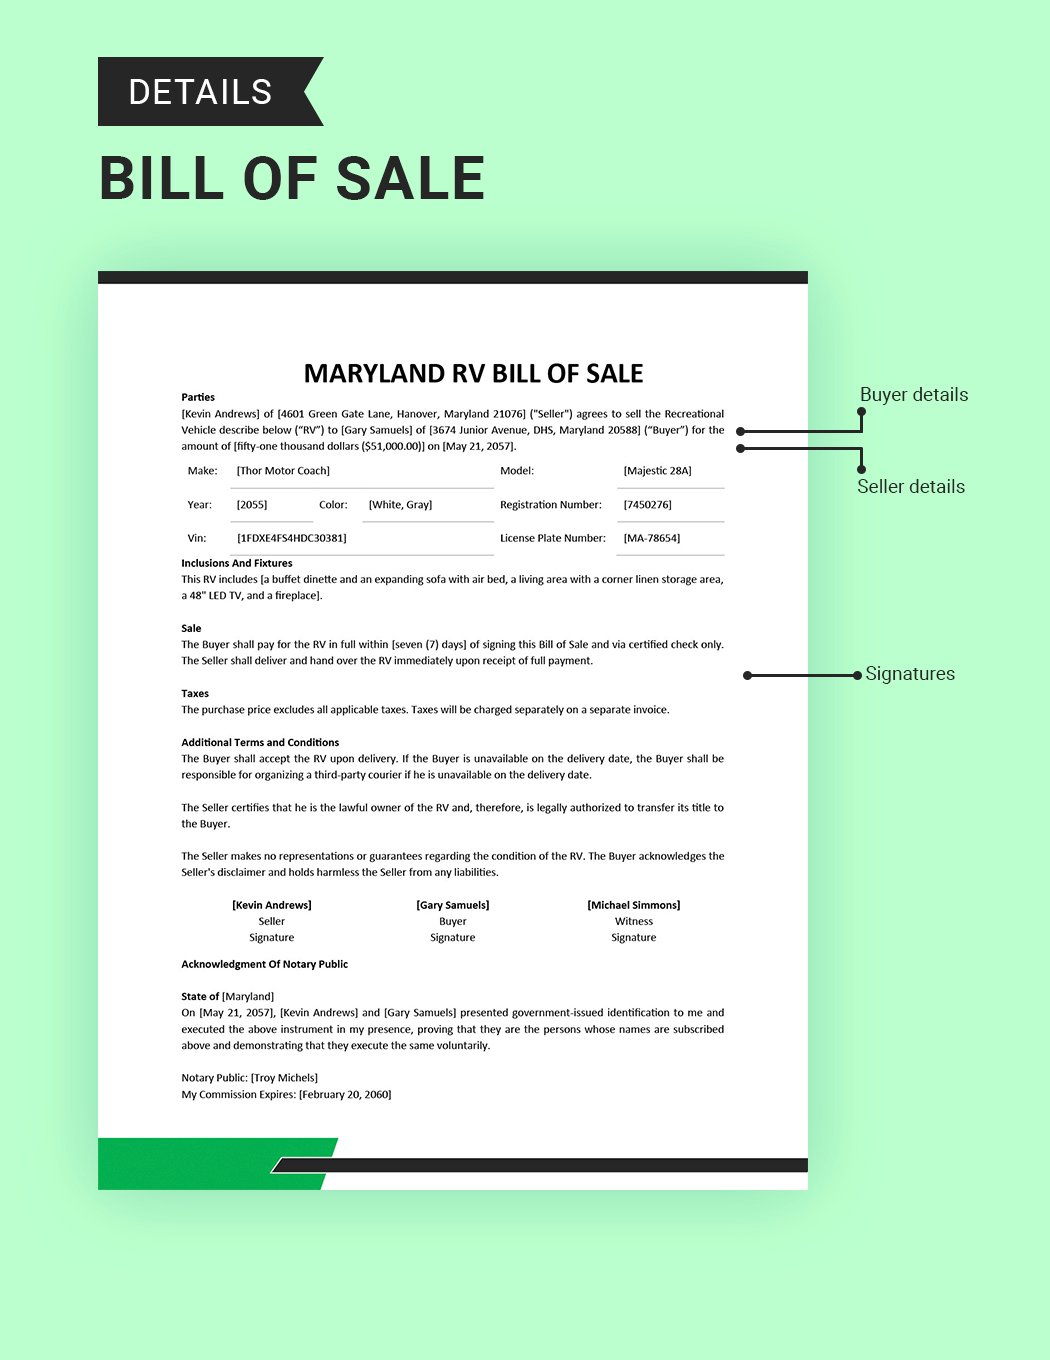 Maryland RV Bill of Sale Template